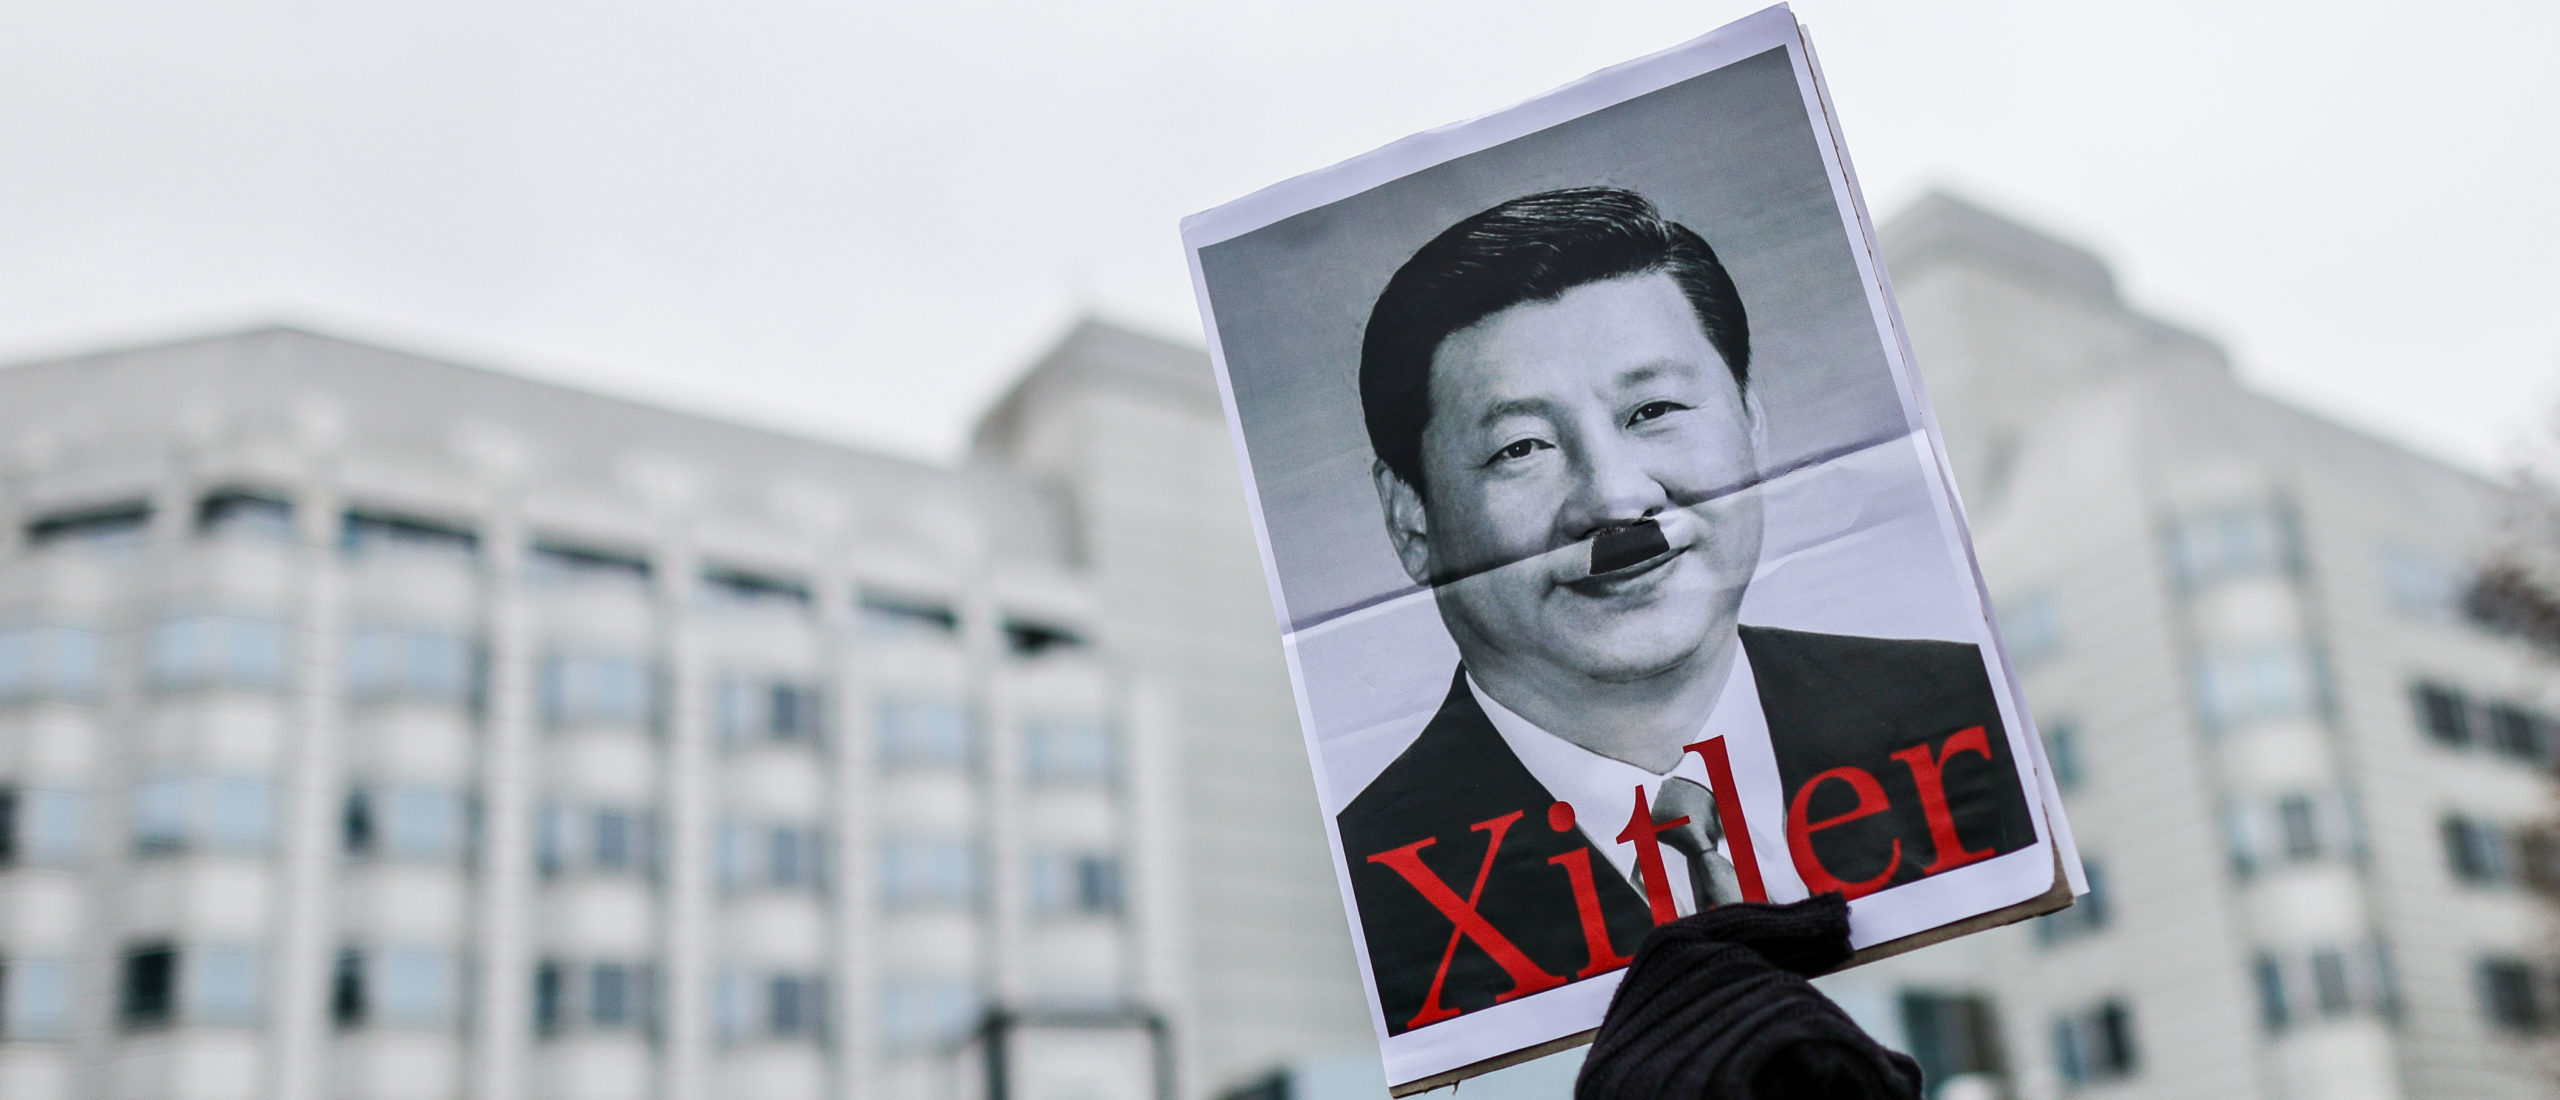 A protester holds a picture of Xi Jinping with a "Hitler moustache" in Germany in 2022. (Photo by Omer Messinger/Getty Images)